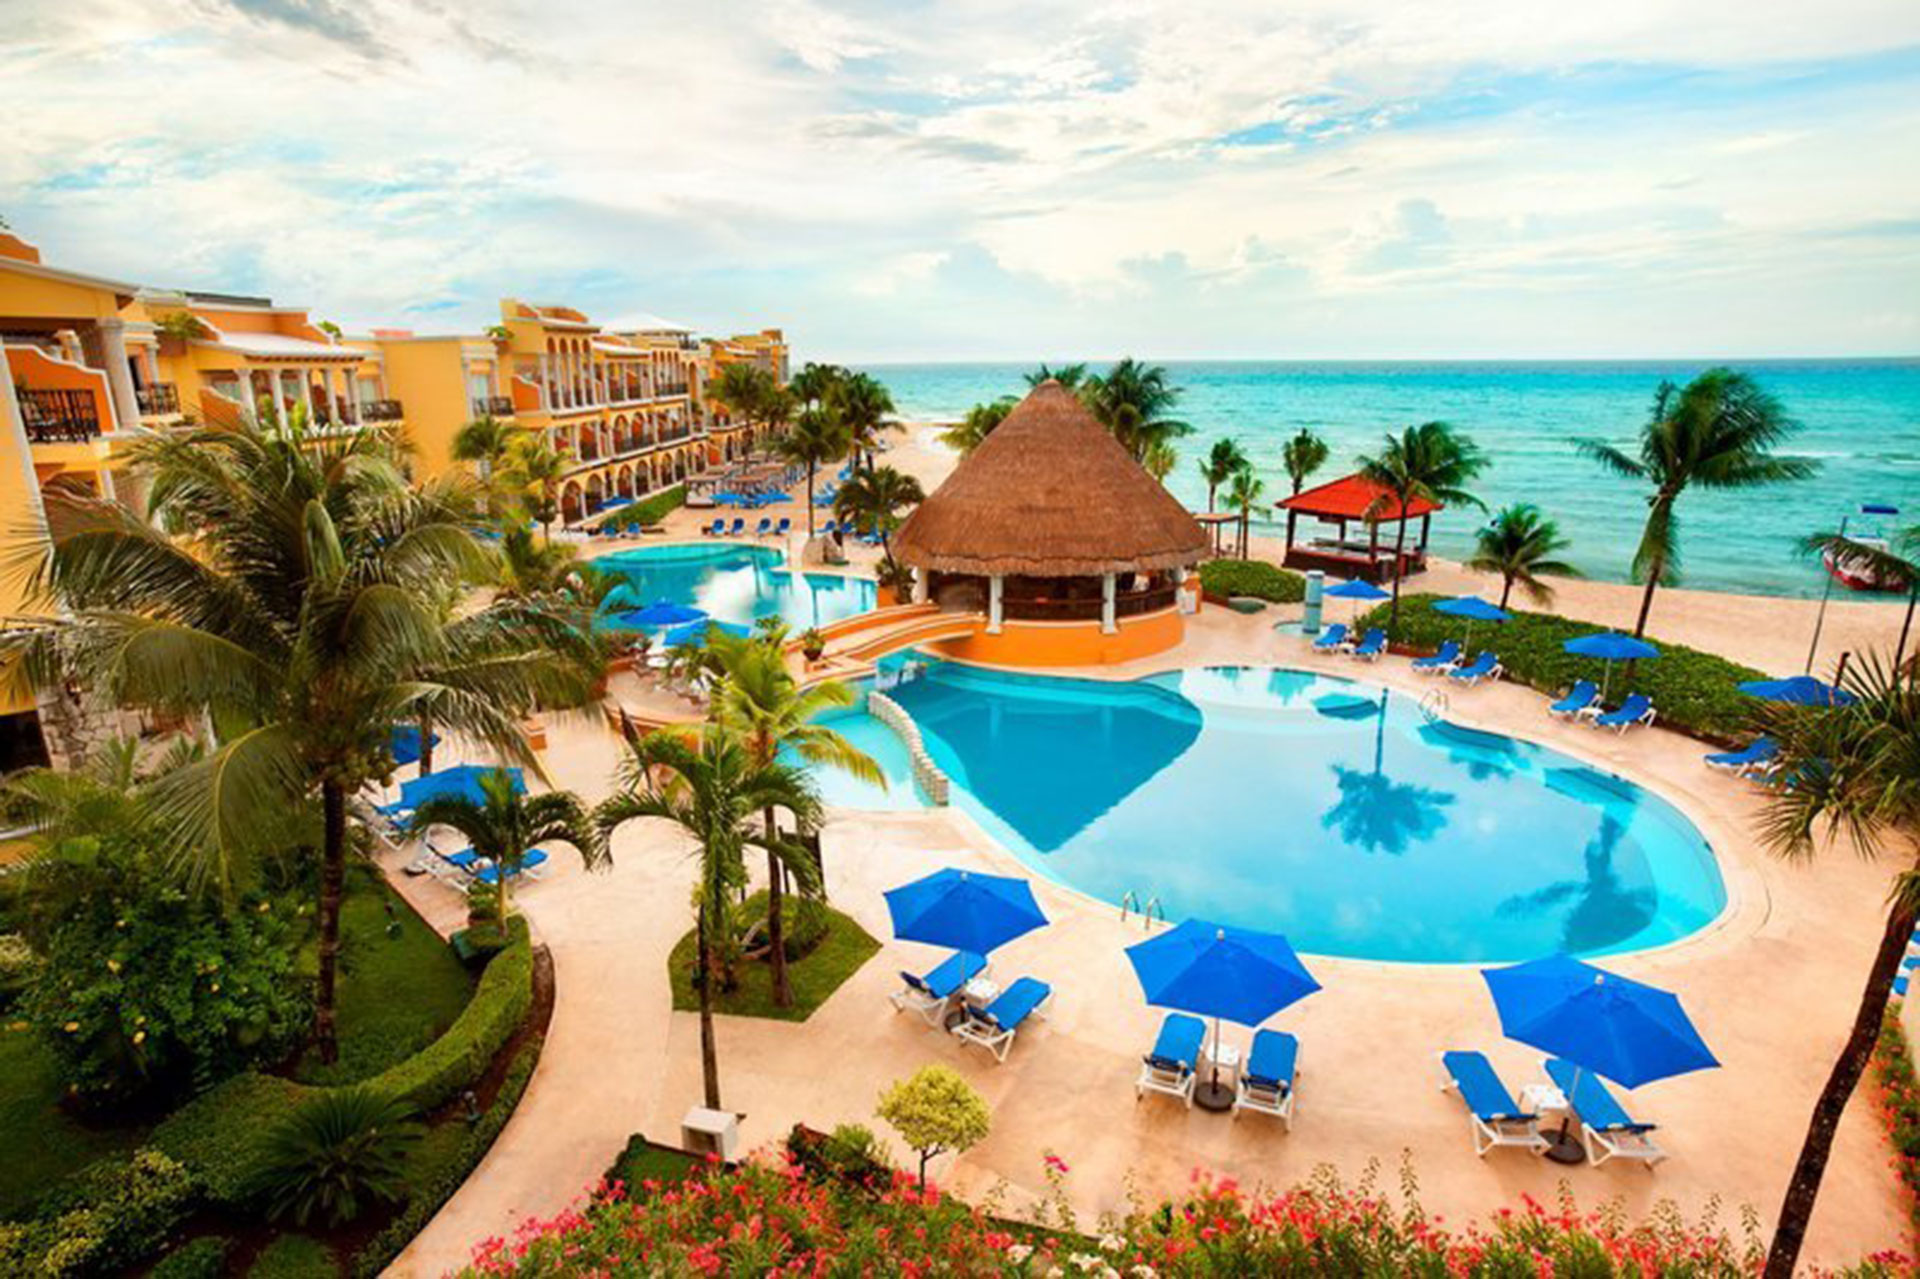 Looking for where to stay in Cancun Mexico? Explore 